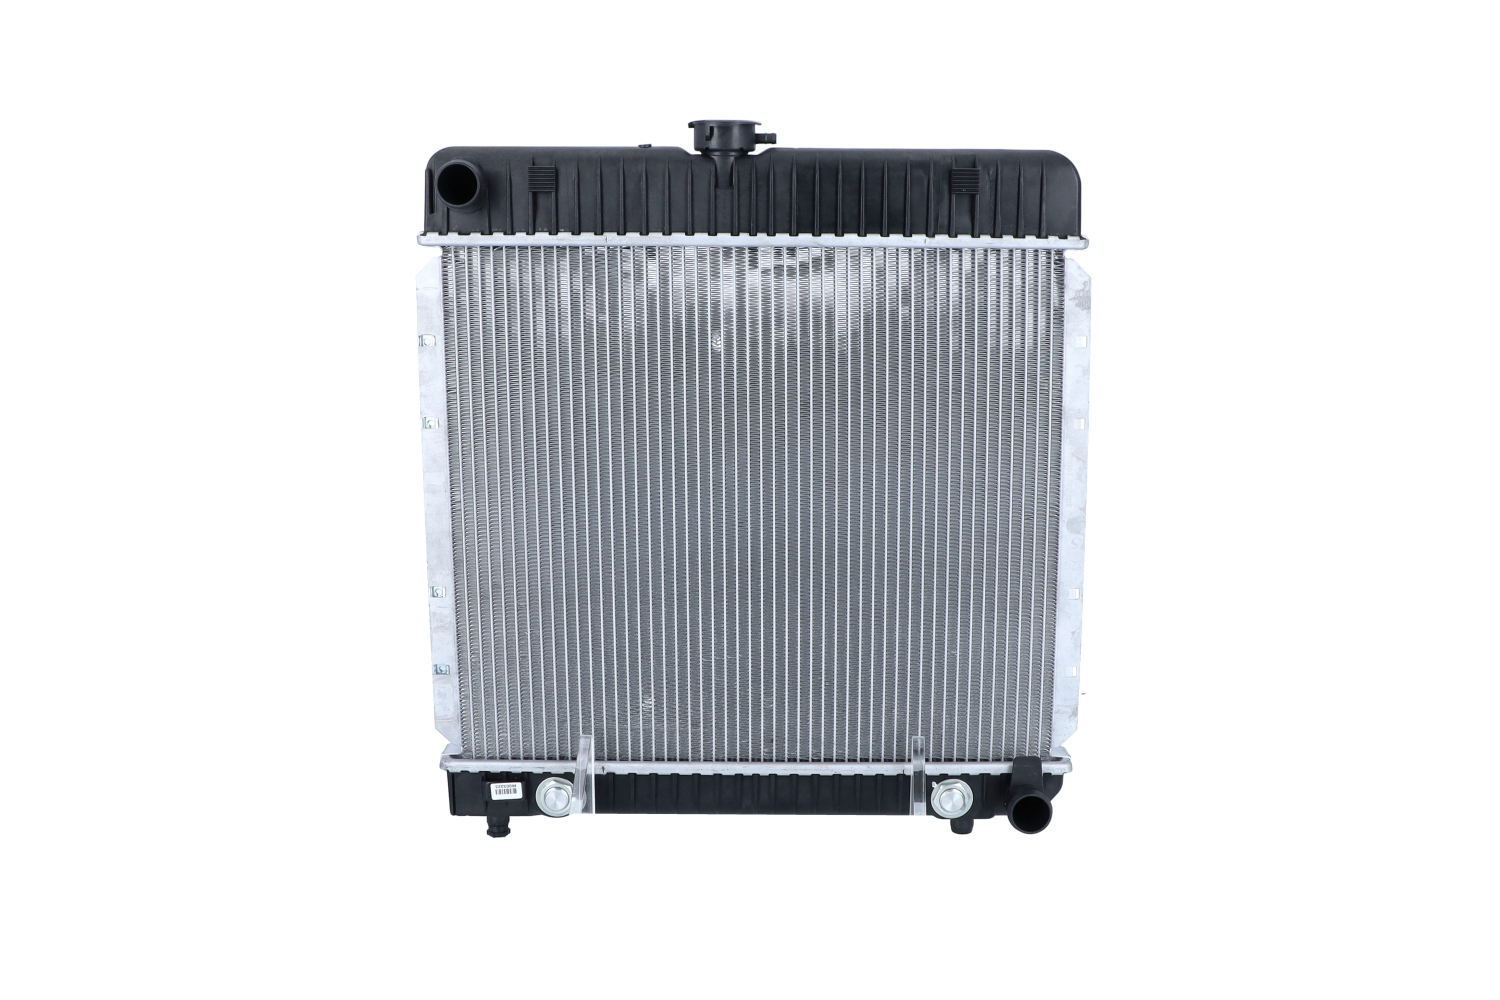 NRF 504250 Engine radiator Aluminium, 485 x 416 x 29 mm, with mounting parts, Brazed cooling fins